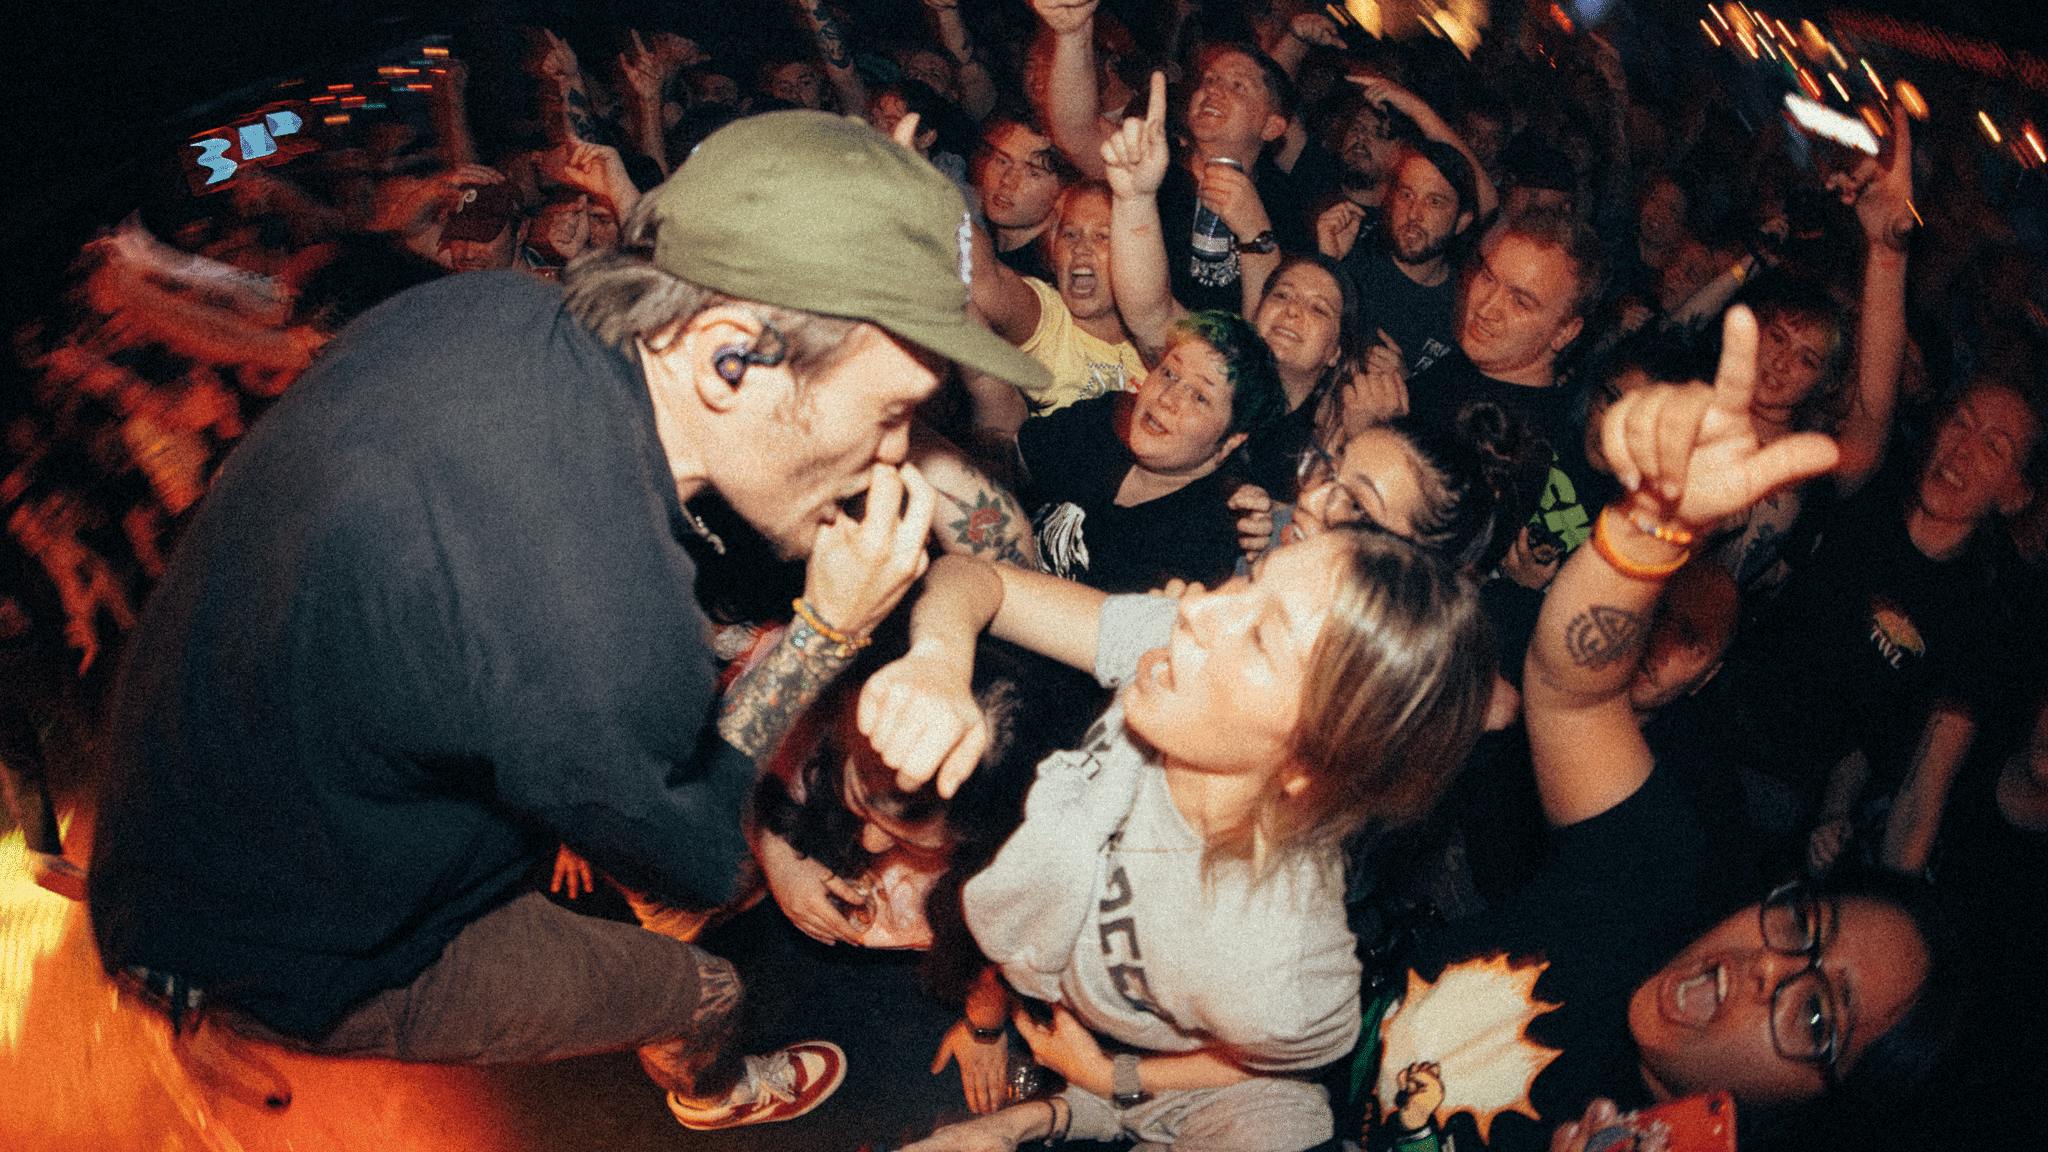 The rise of Neck Deep, as told through their most important gigs